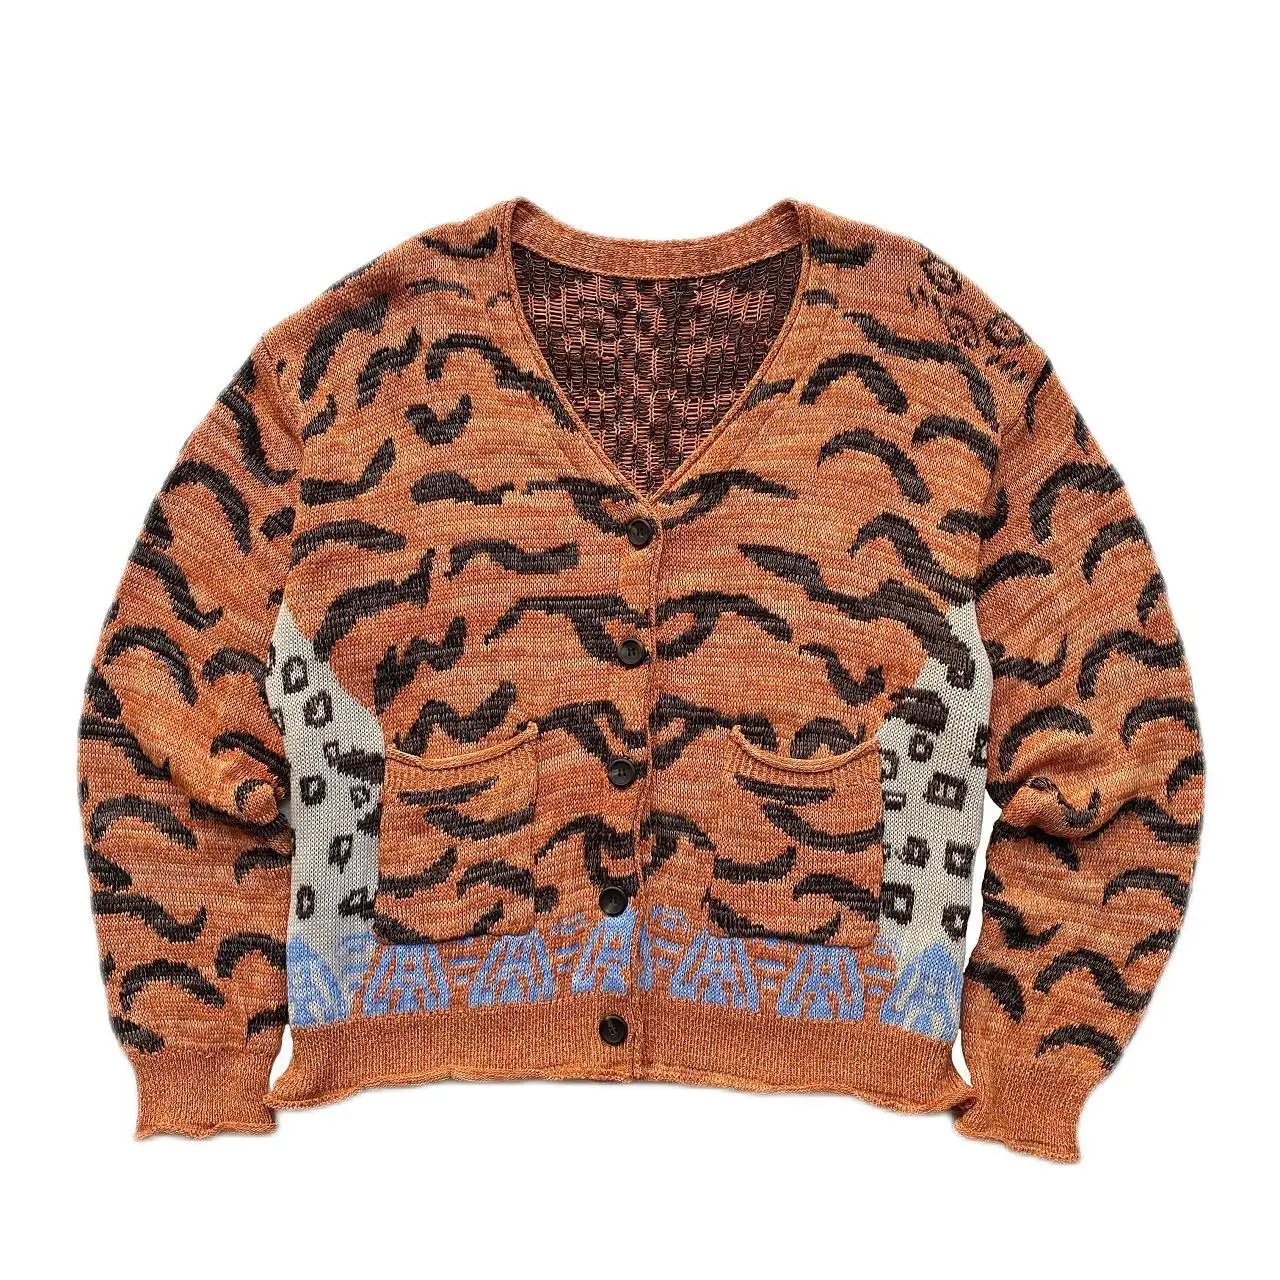 Kapital Vintage Hirata and Hiroshi Japanese Sweaters Casual Tiger and Leopard Men's Long Sleeve Loose V-neck Knitted Cardigan